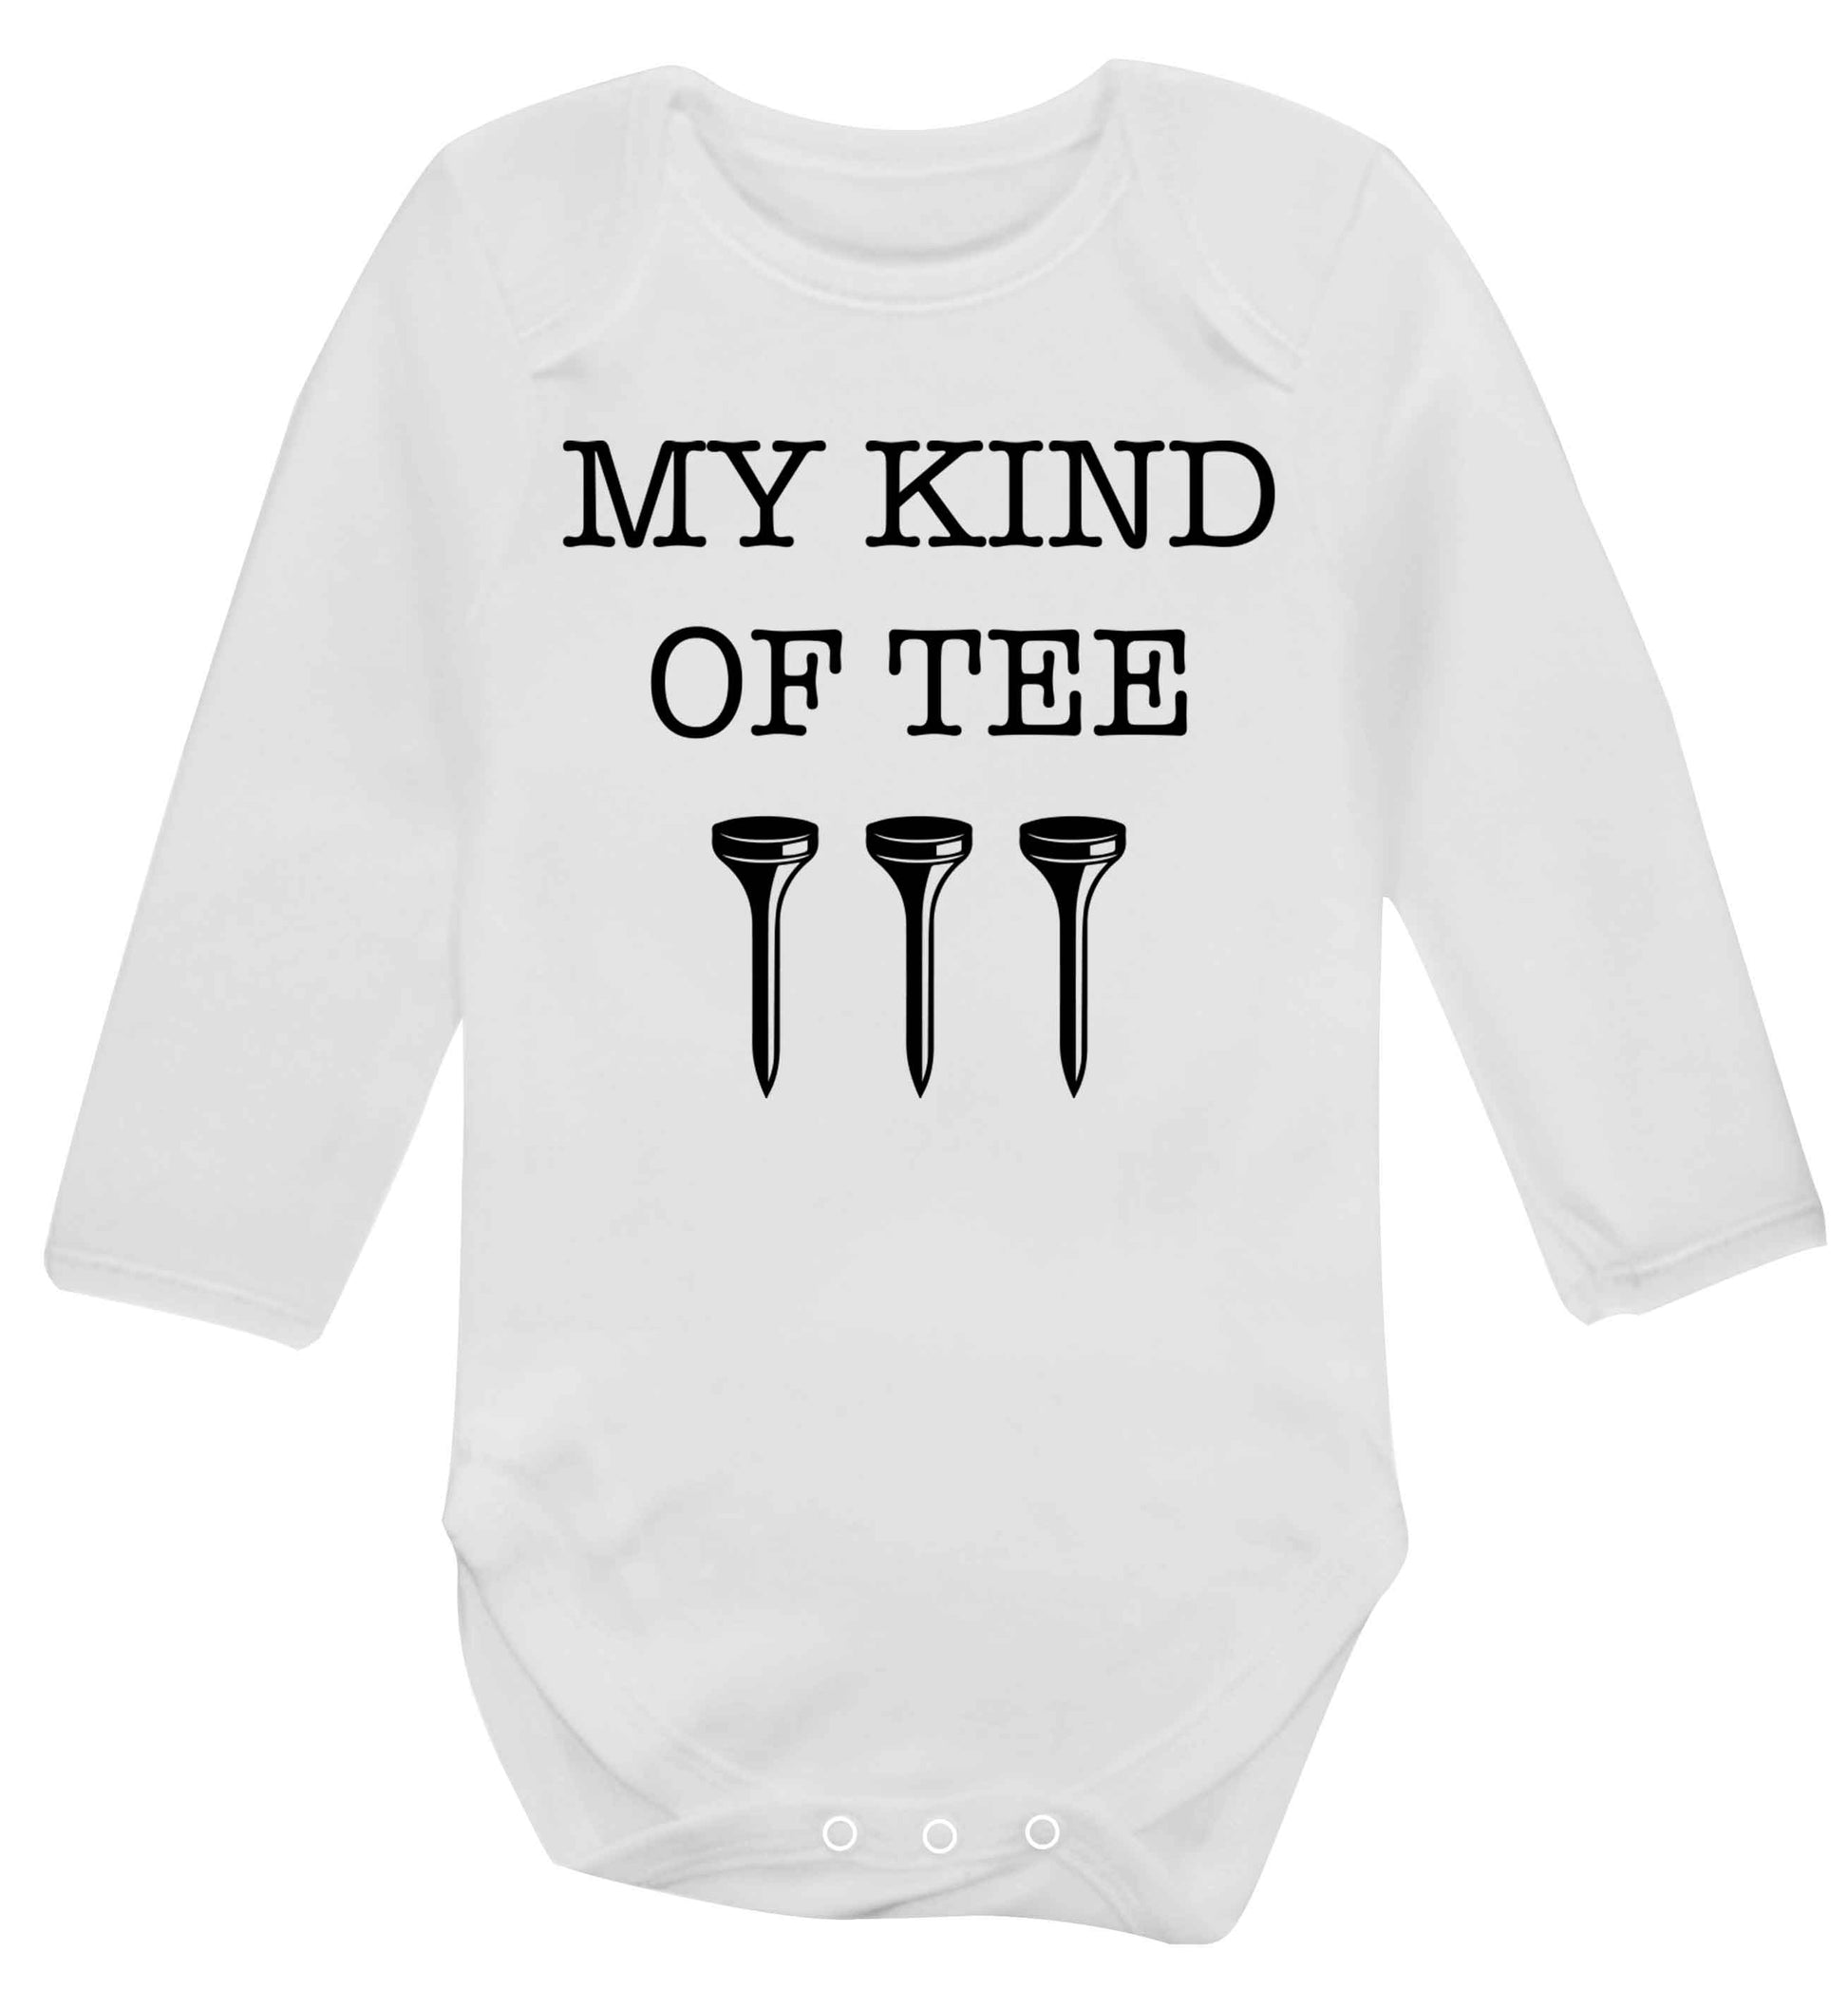 My kind of tee Baby Vest long sleeved white 6-12 months